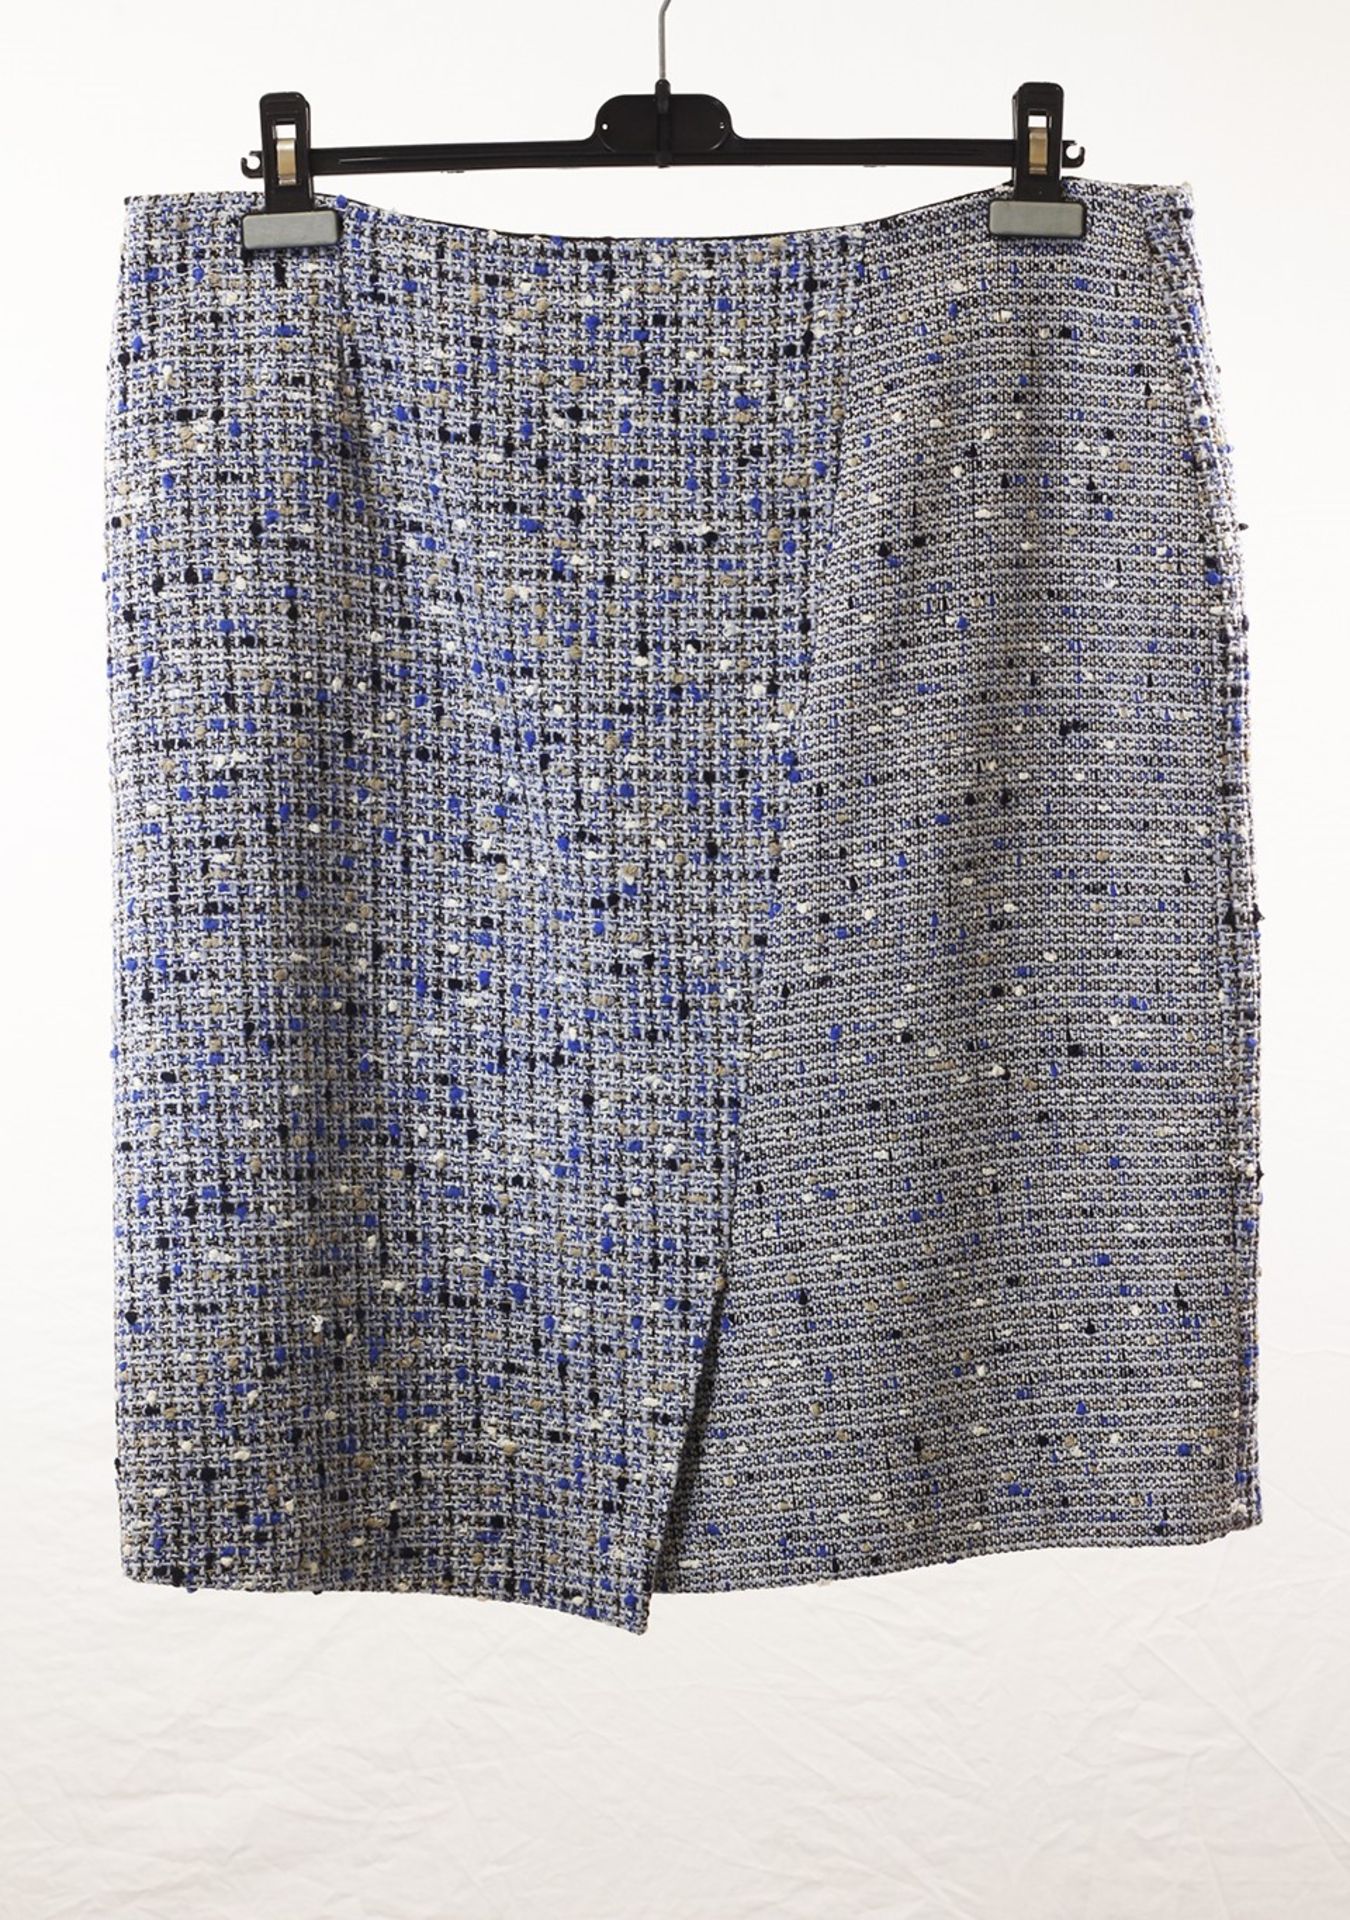 1 x Anne Belin Blue Tweed Skirt - Size: 20 - From A High End Clothing Boutique